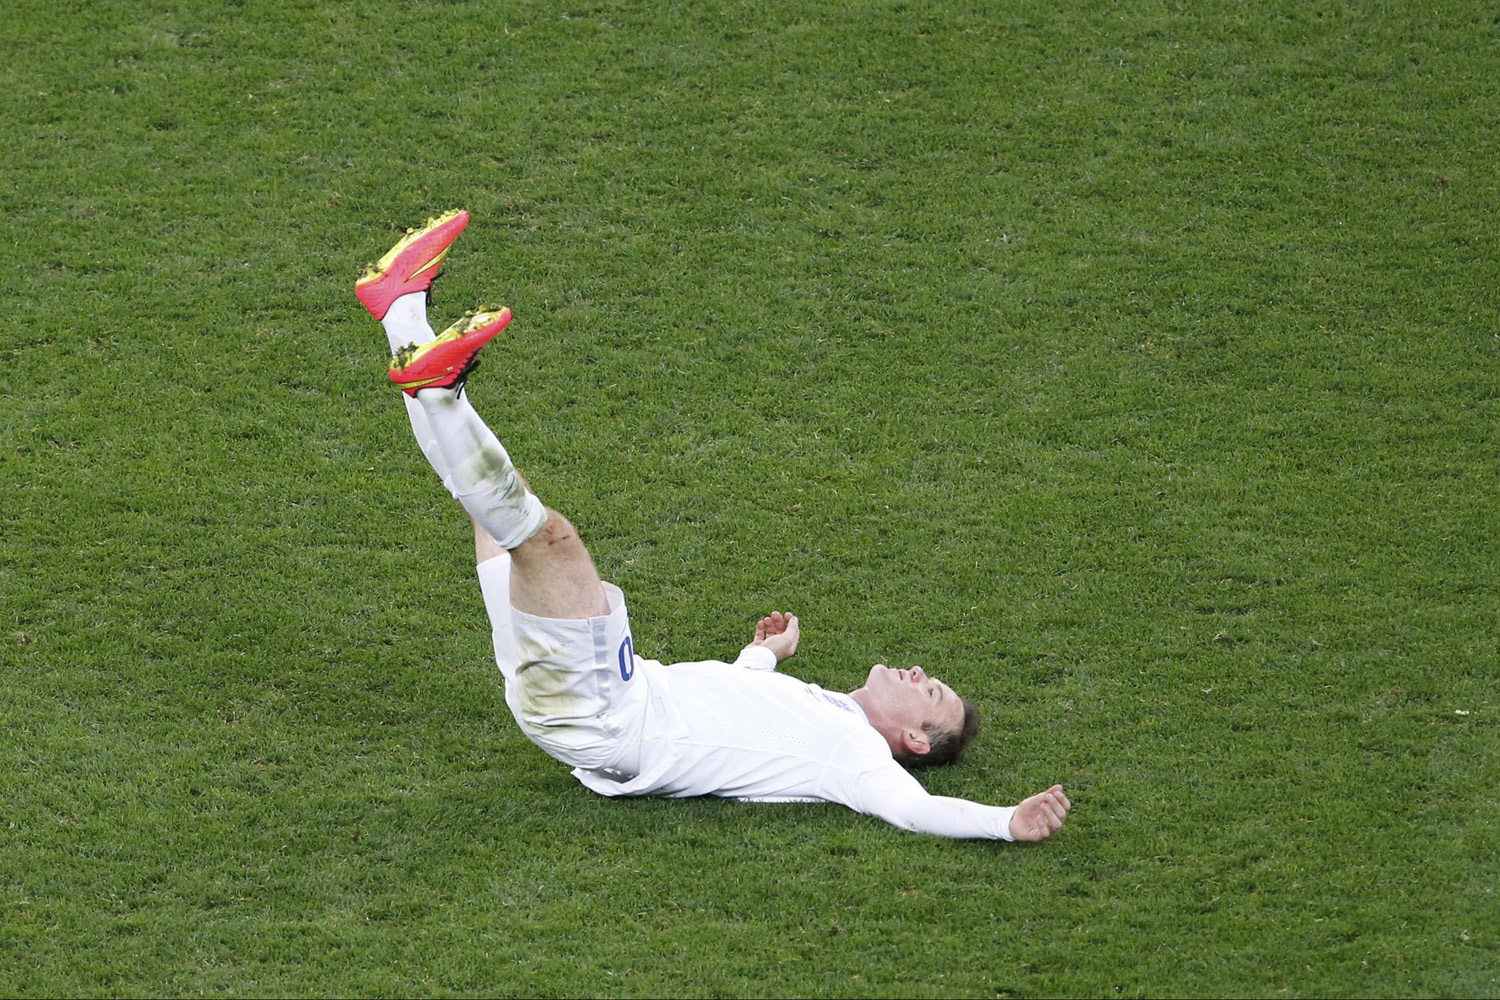 Jun. 19, 2014. England's Wayne Rooney reacts to missing a goal during their 2014 World Cup Group D soccer match against Uruguay at the Corinthians arena in Sao Paulo.